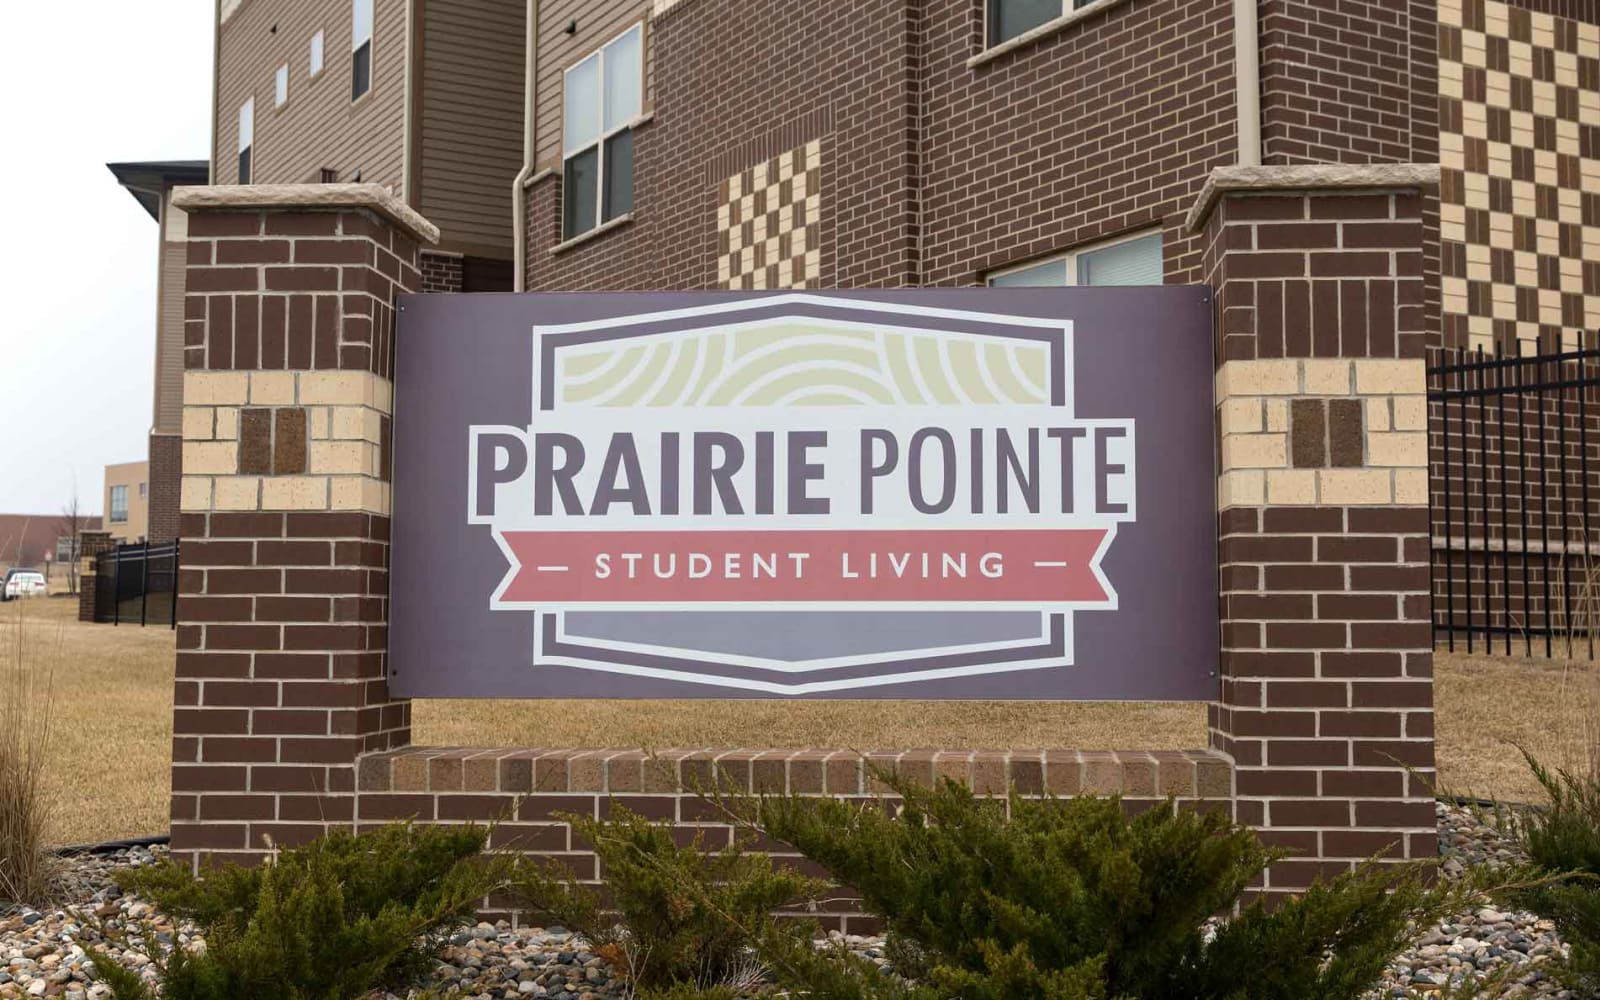 Branding and signage at Prairie Pointe Student Living in Ankeny, Iowa